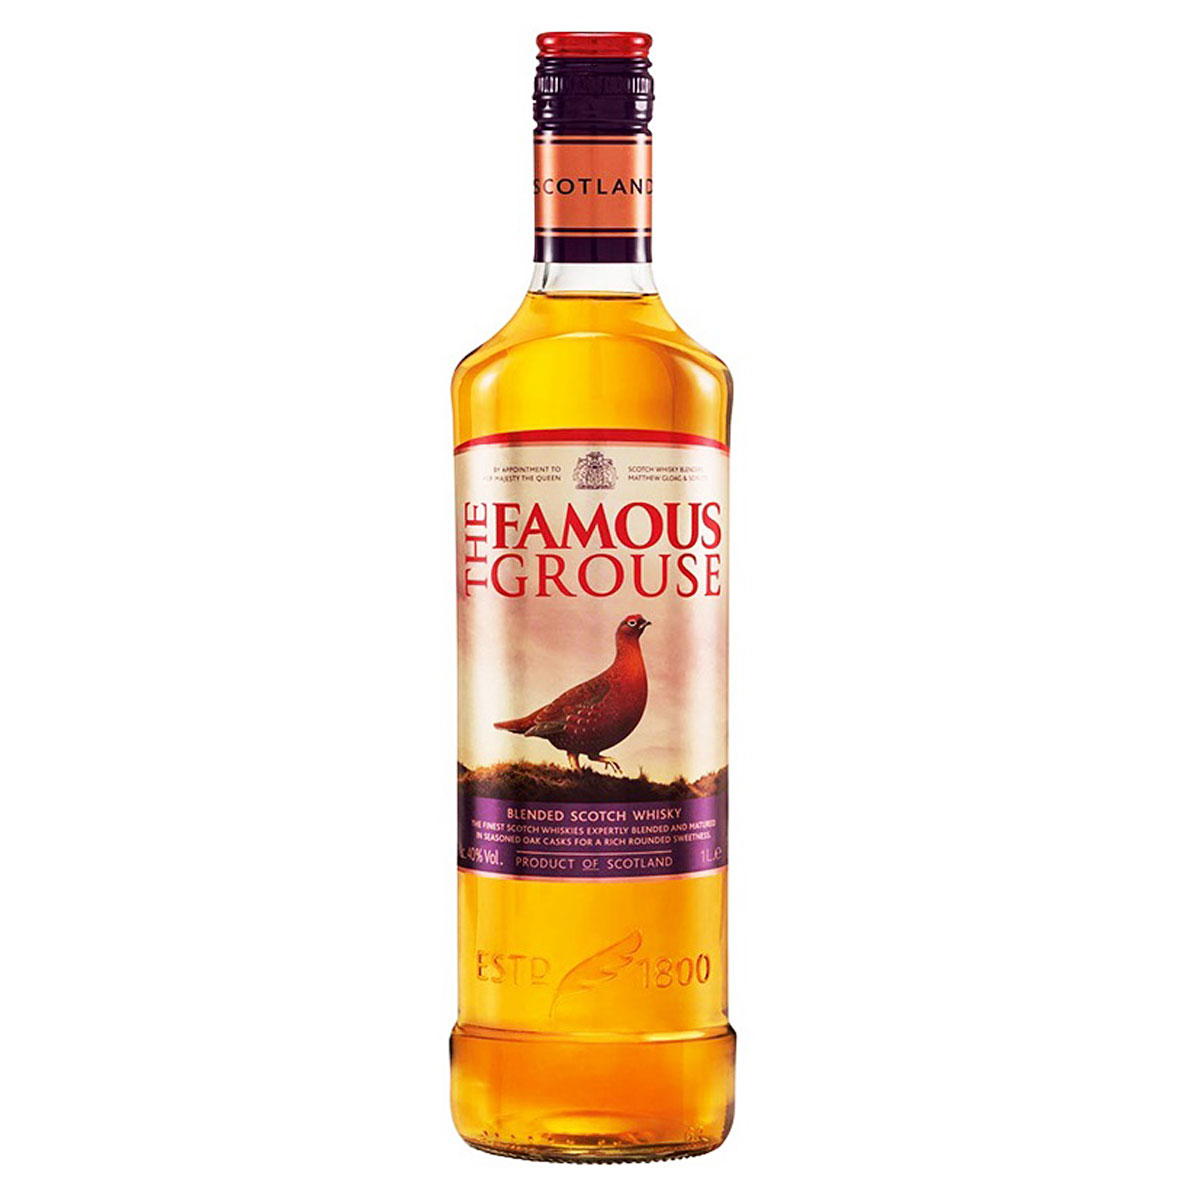 a bottle of famous grouse whisky